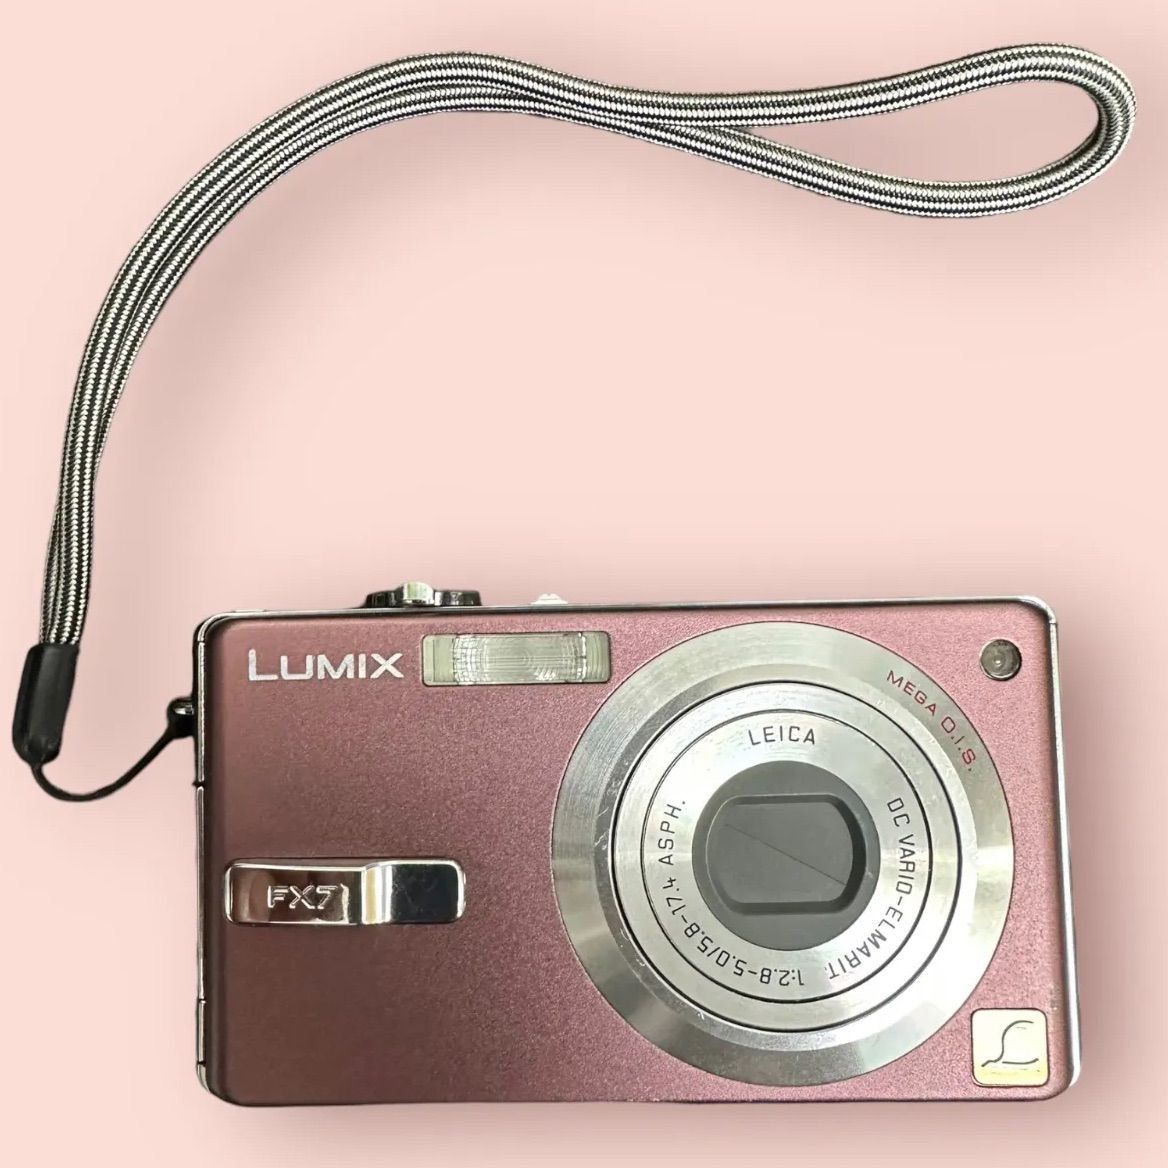 LUMIX FX7 DMC-FX7 コンパクトデジカメ バッテリー・充電器付き 